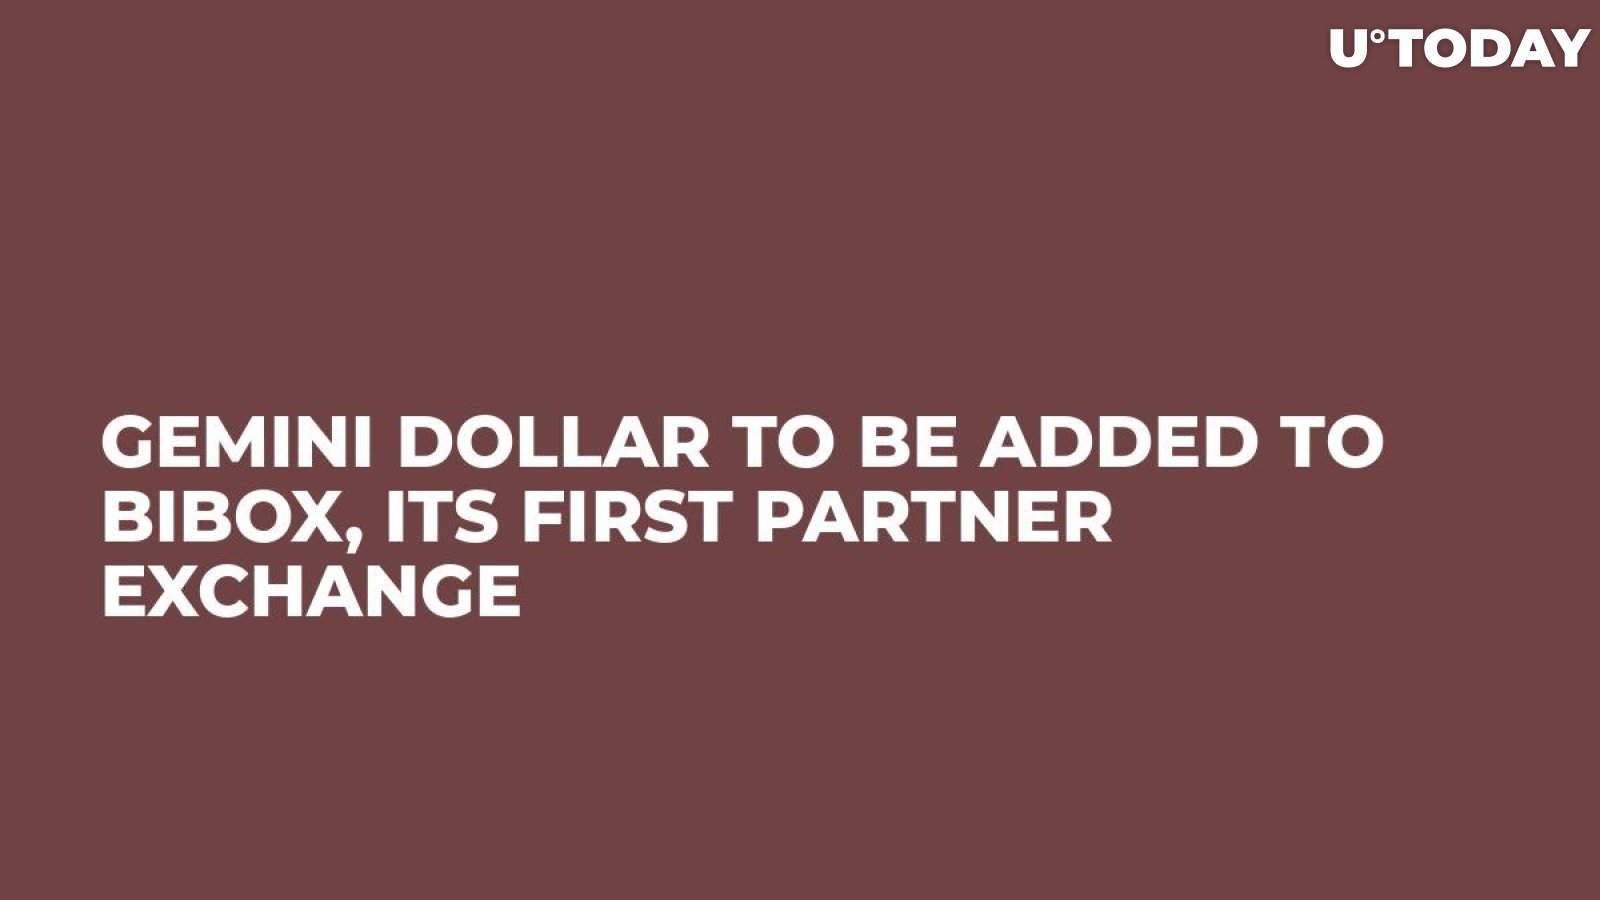 Gemini Dollar to Be Added to Bibox, Its First Partner Exchange